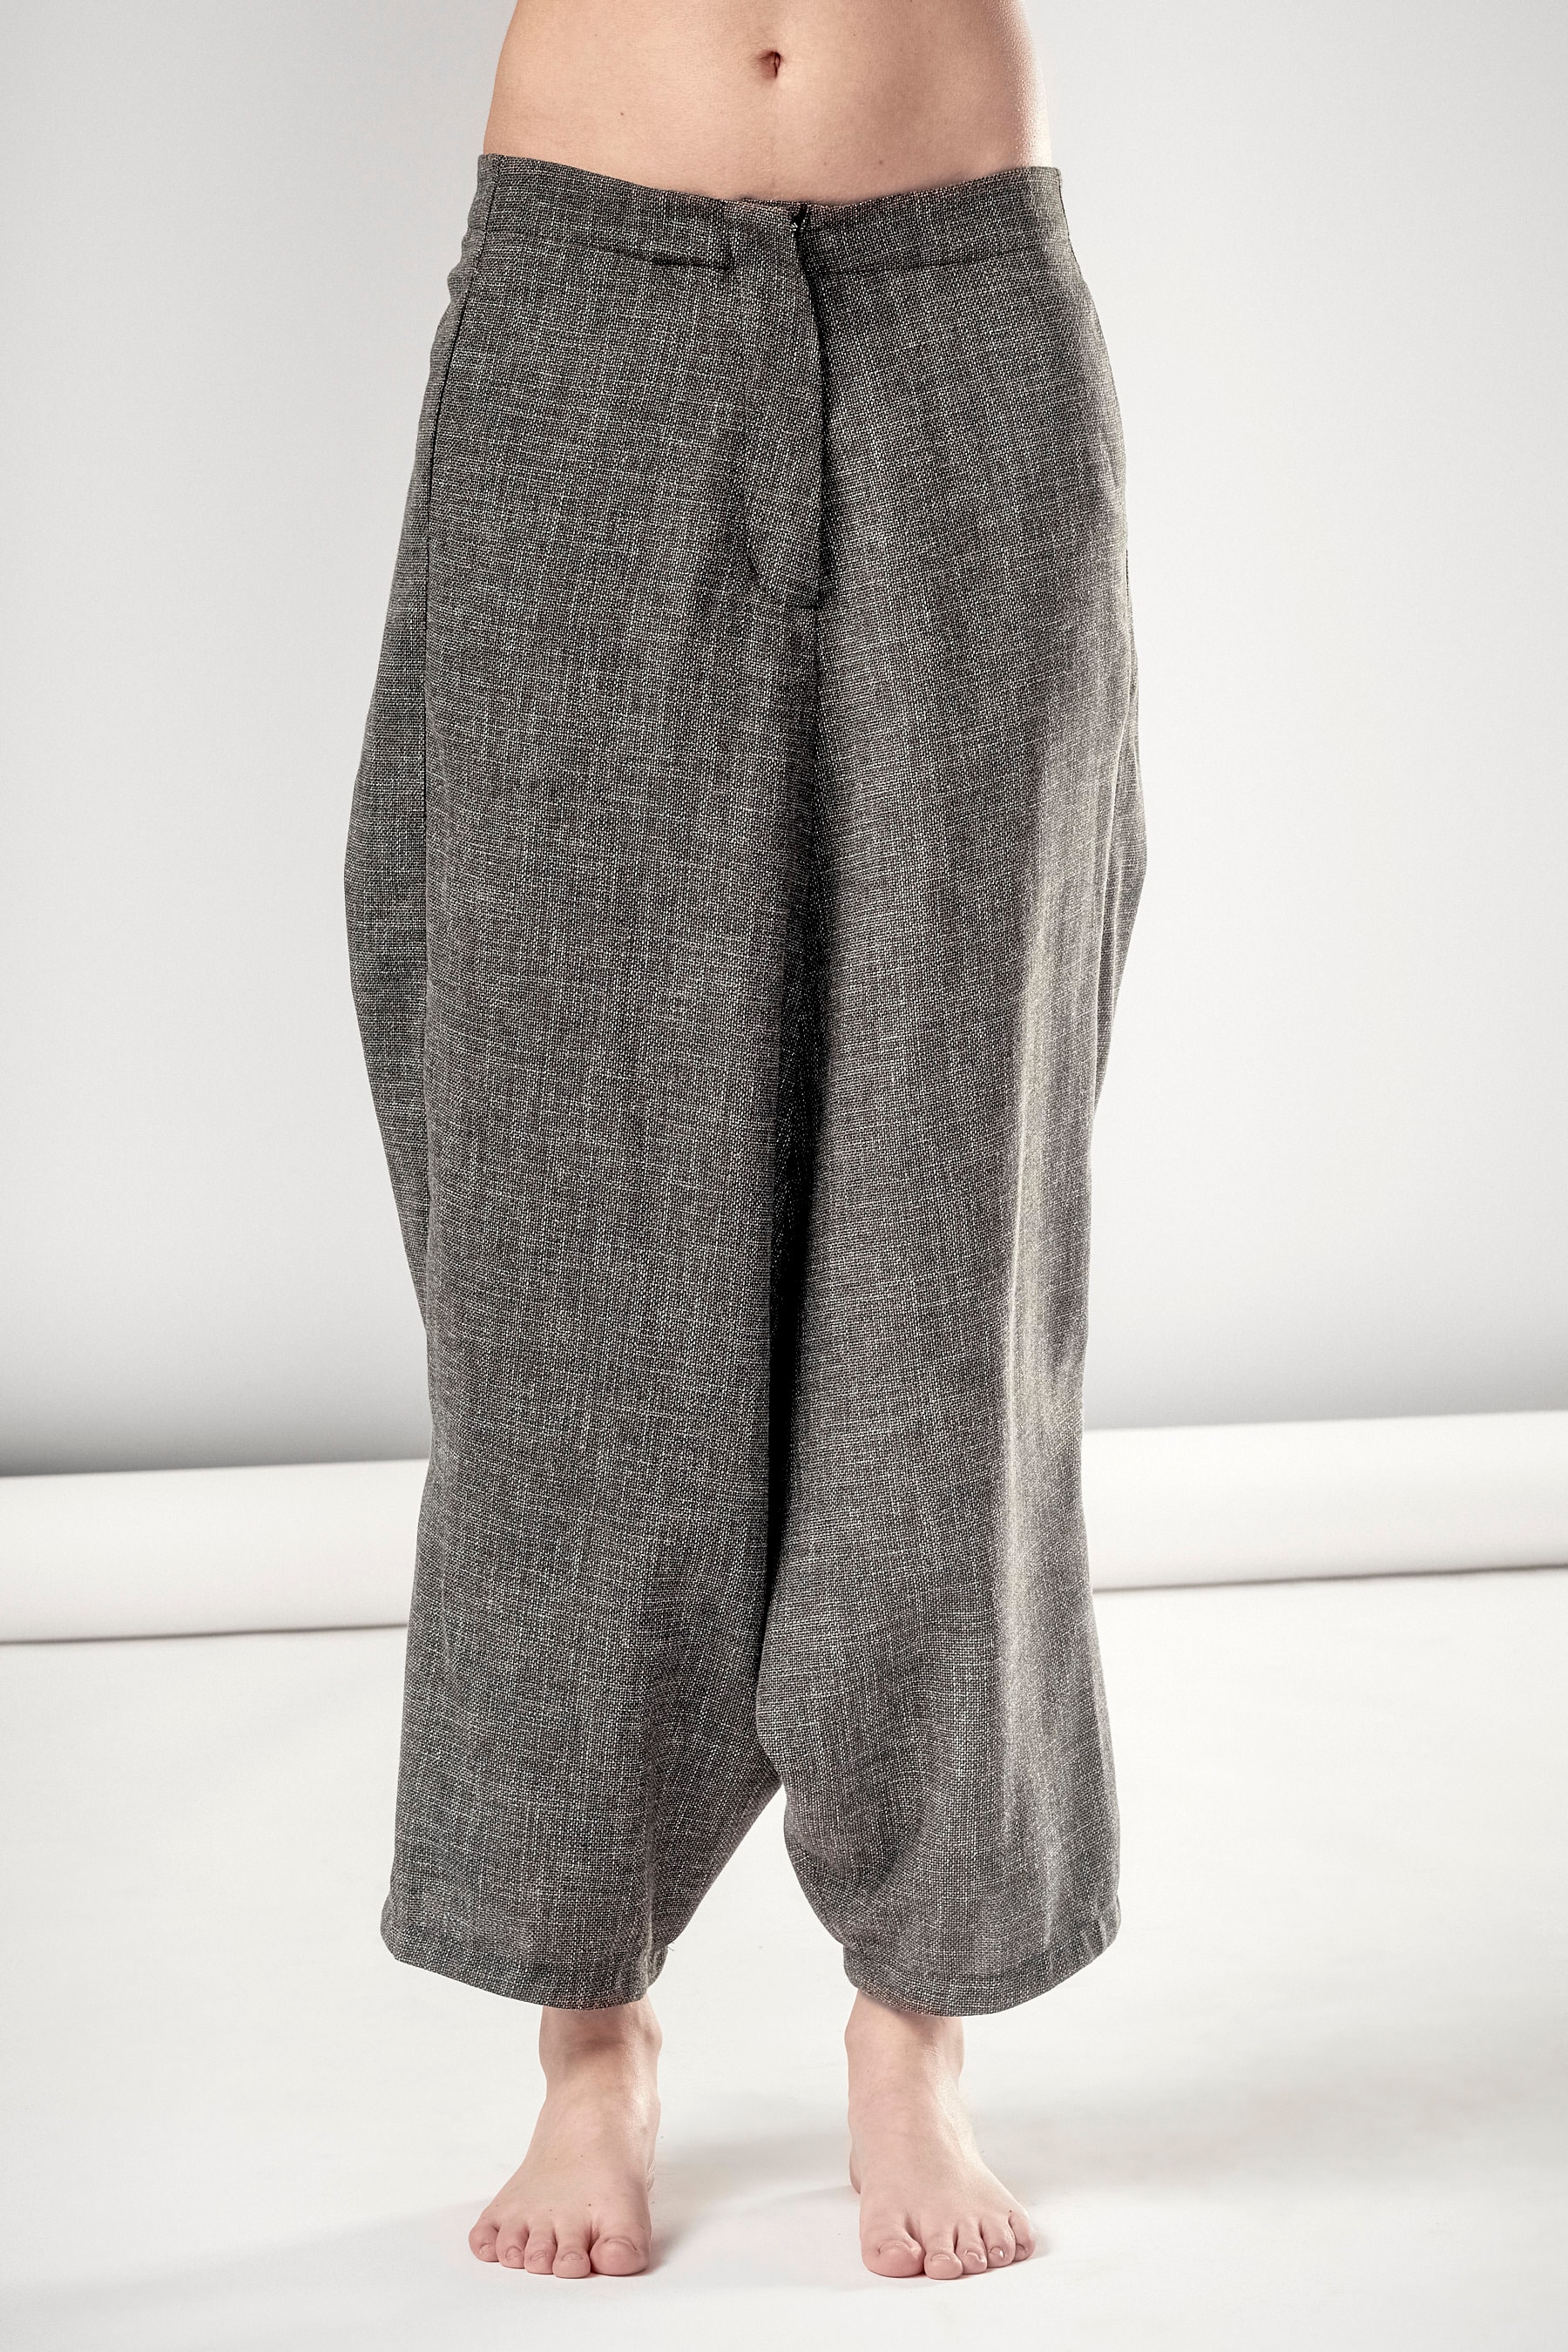 Heather Gray Cropped Wool Pants/ Extravagant Drop Crotch | Etsy